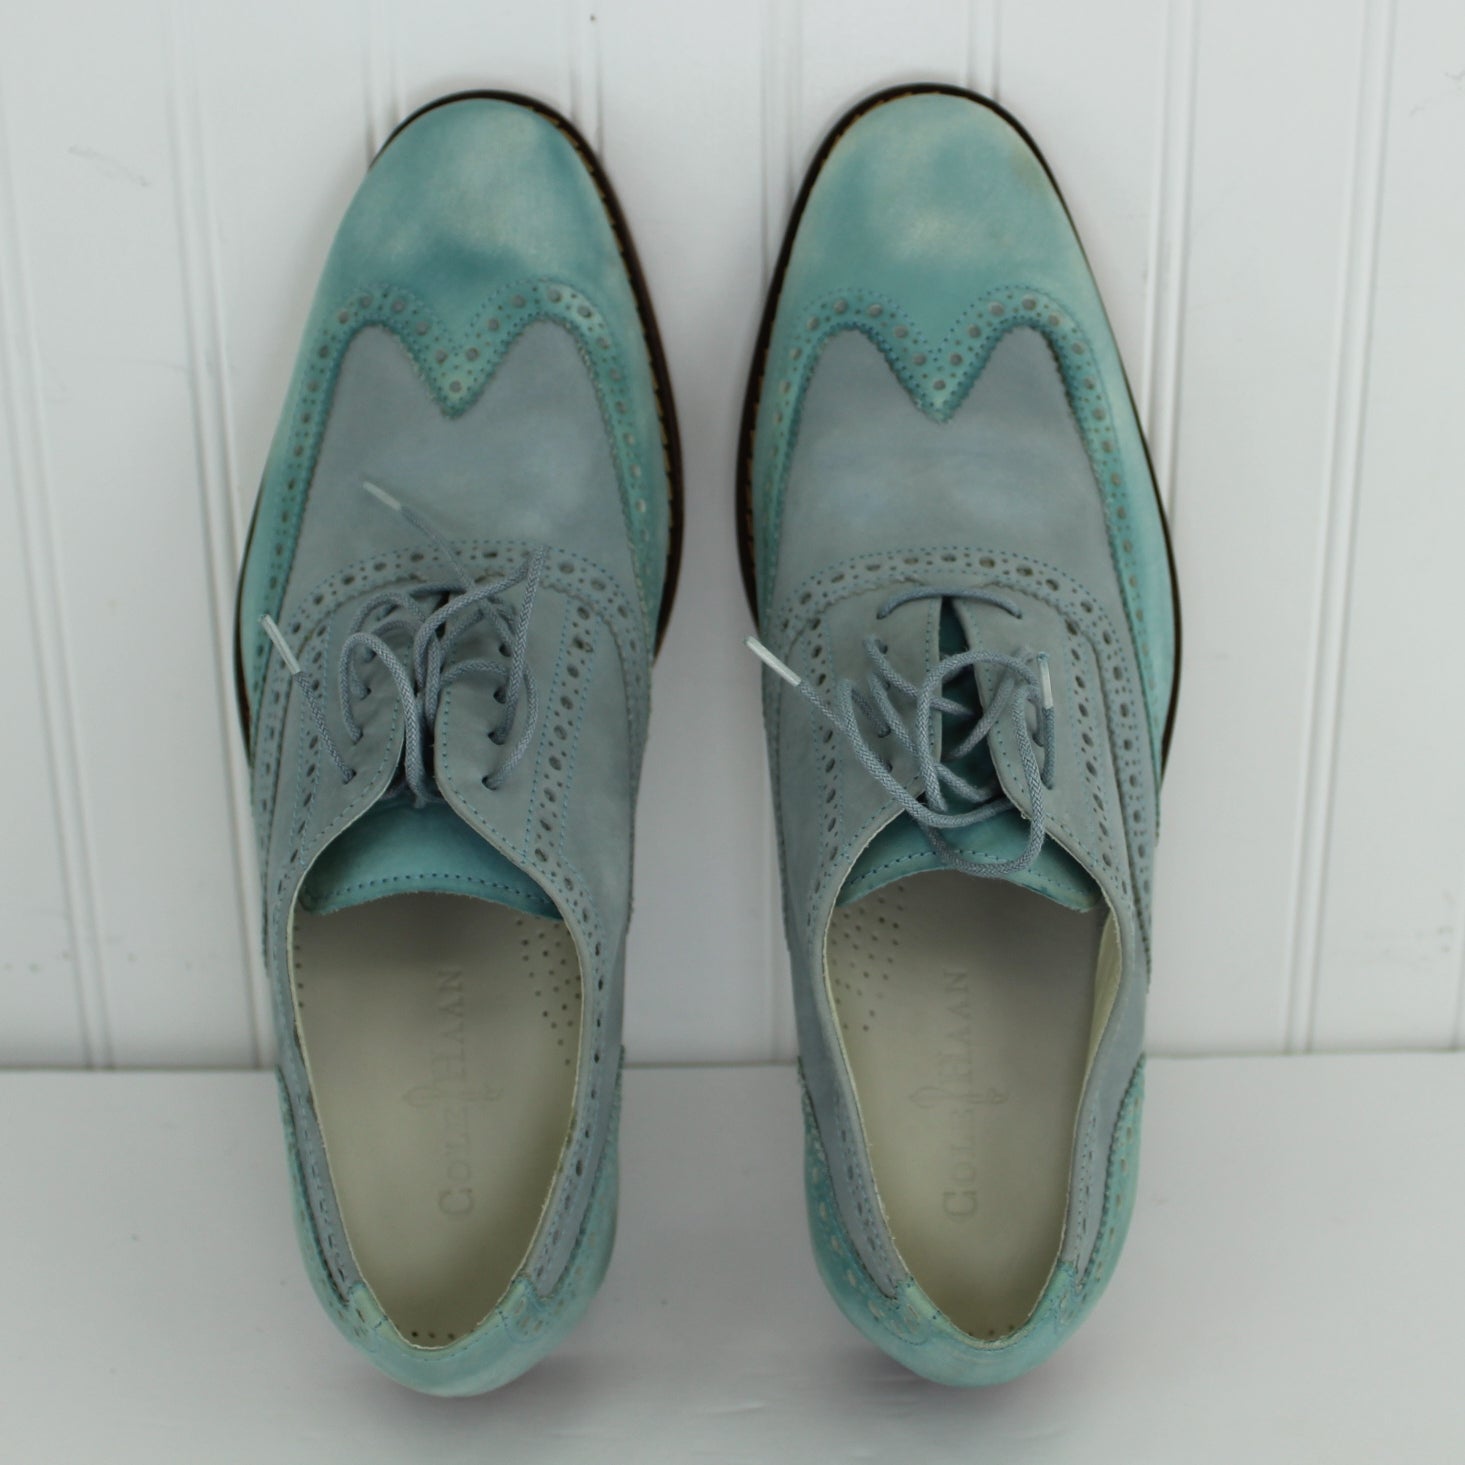 Cole Haan Nike Air Mens Saddle Shoes New in Box Cool Shades of Blue 11M blue shoe strings to match